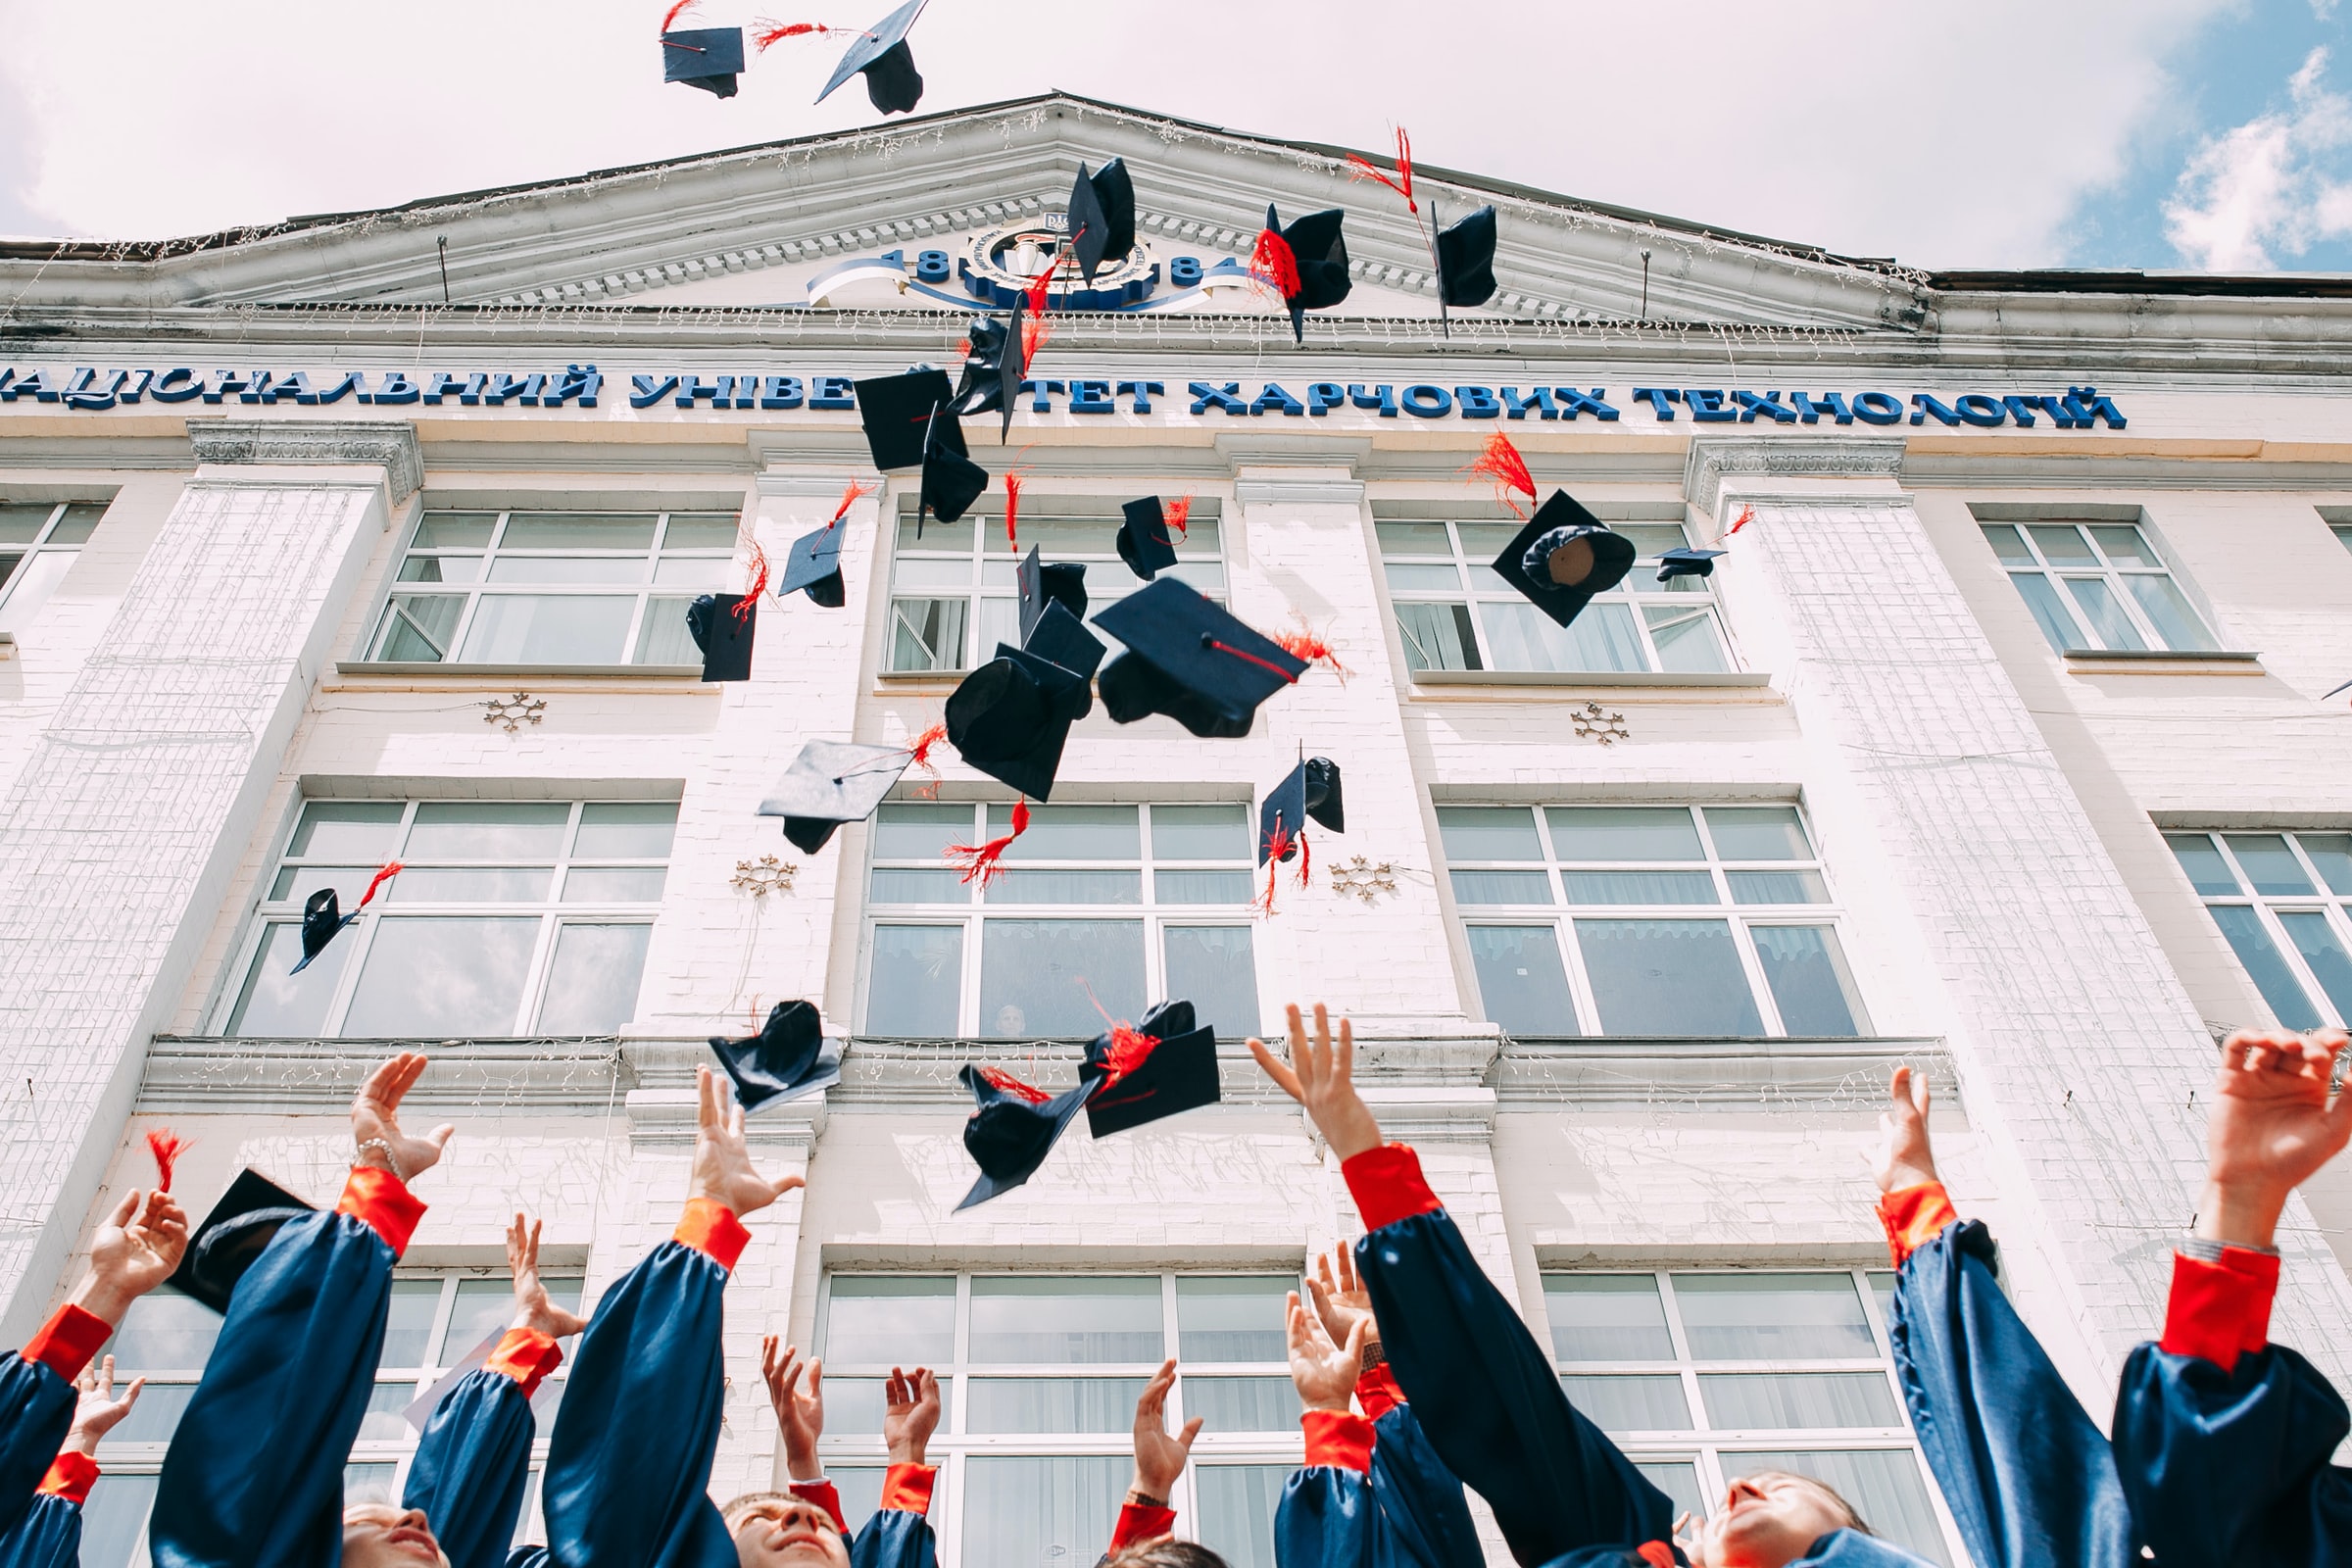 Check out our list with the ten best personal student loans! Source: Unsplash.